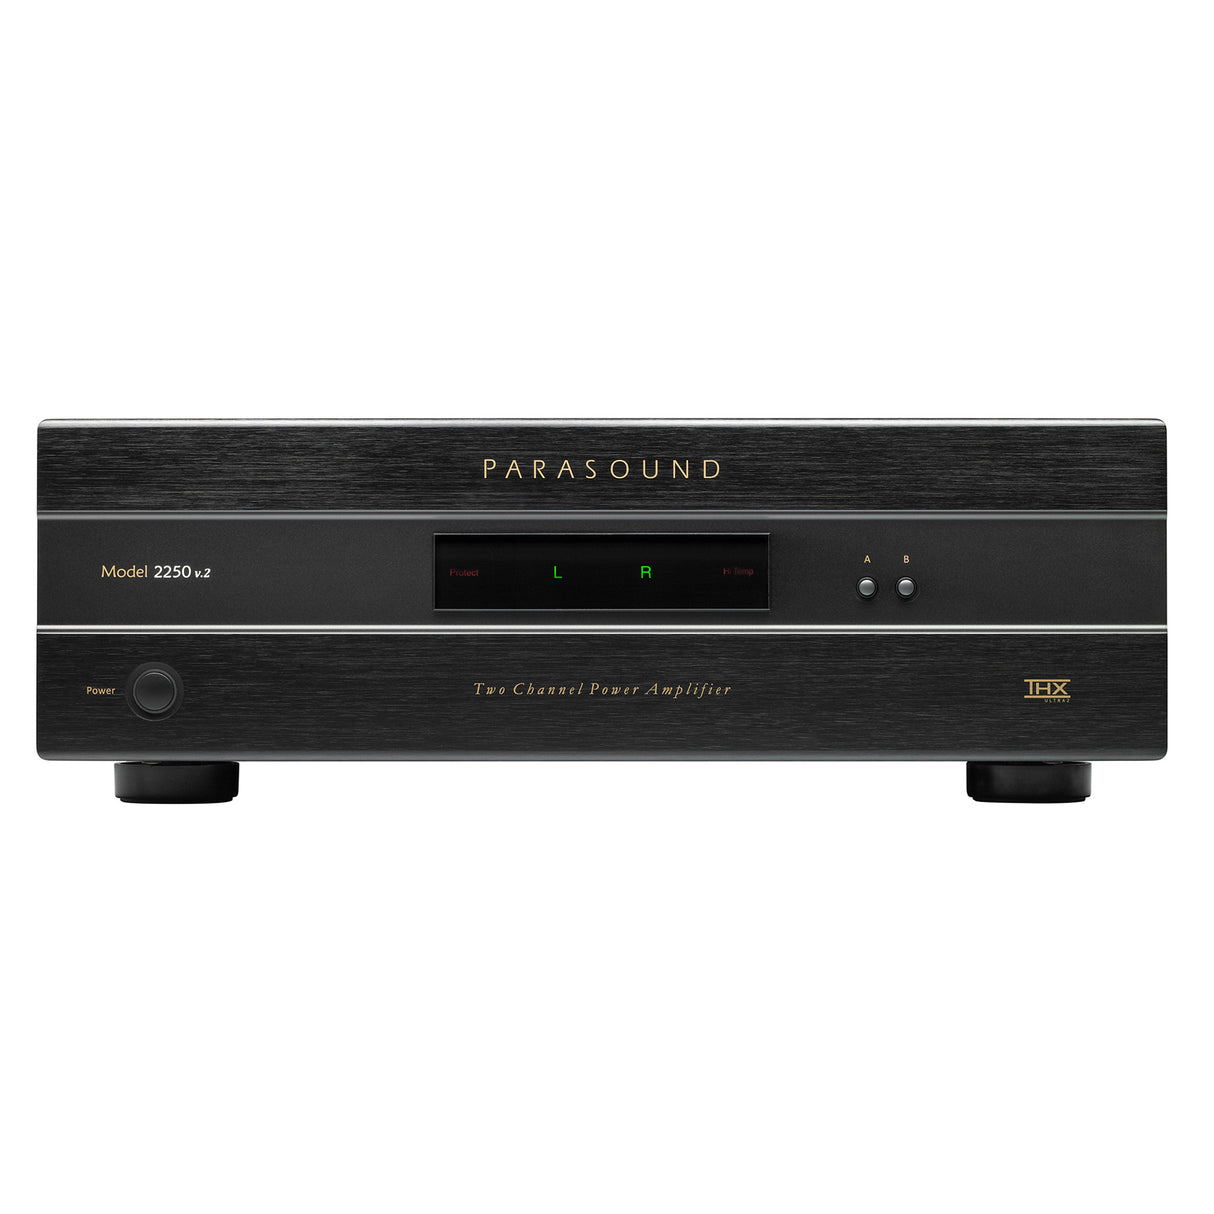 Parasound New Classic 2250 v.2 - 2 Channel Power Amplifier (Black)